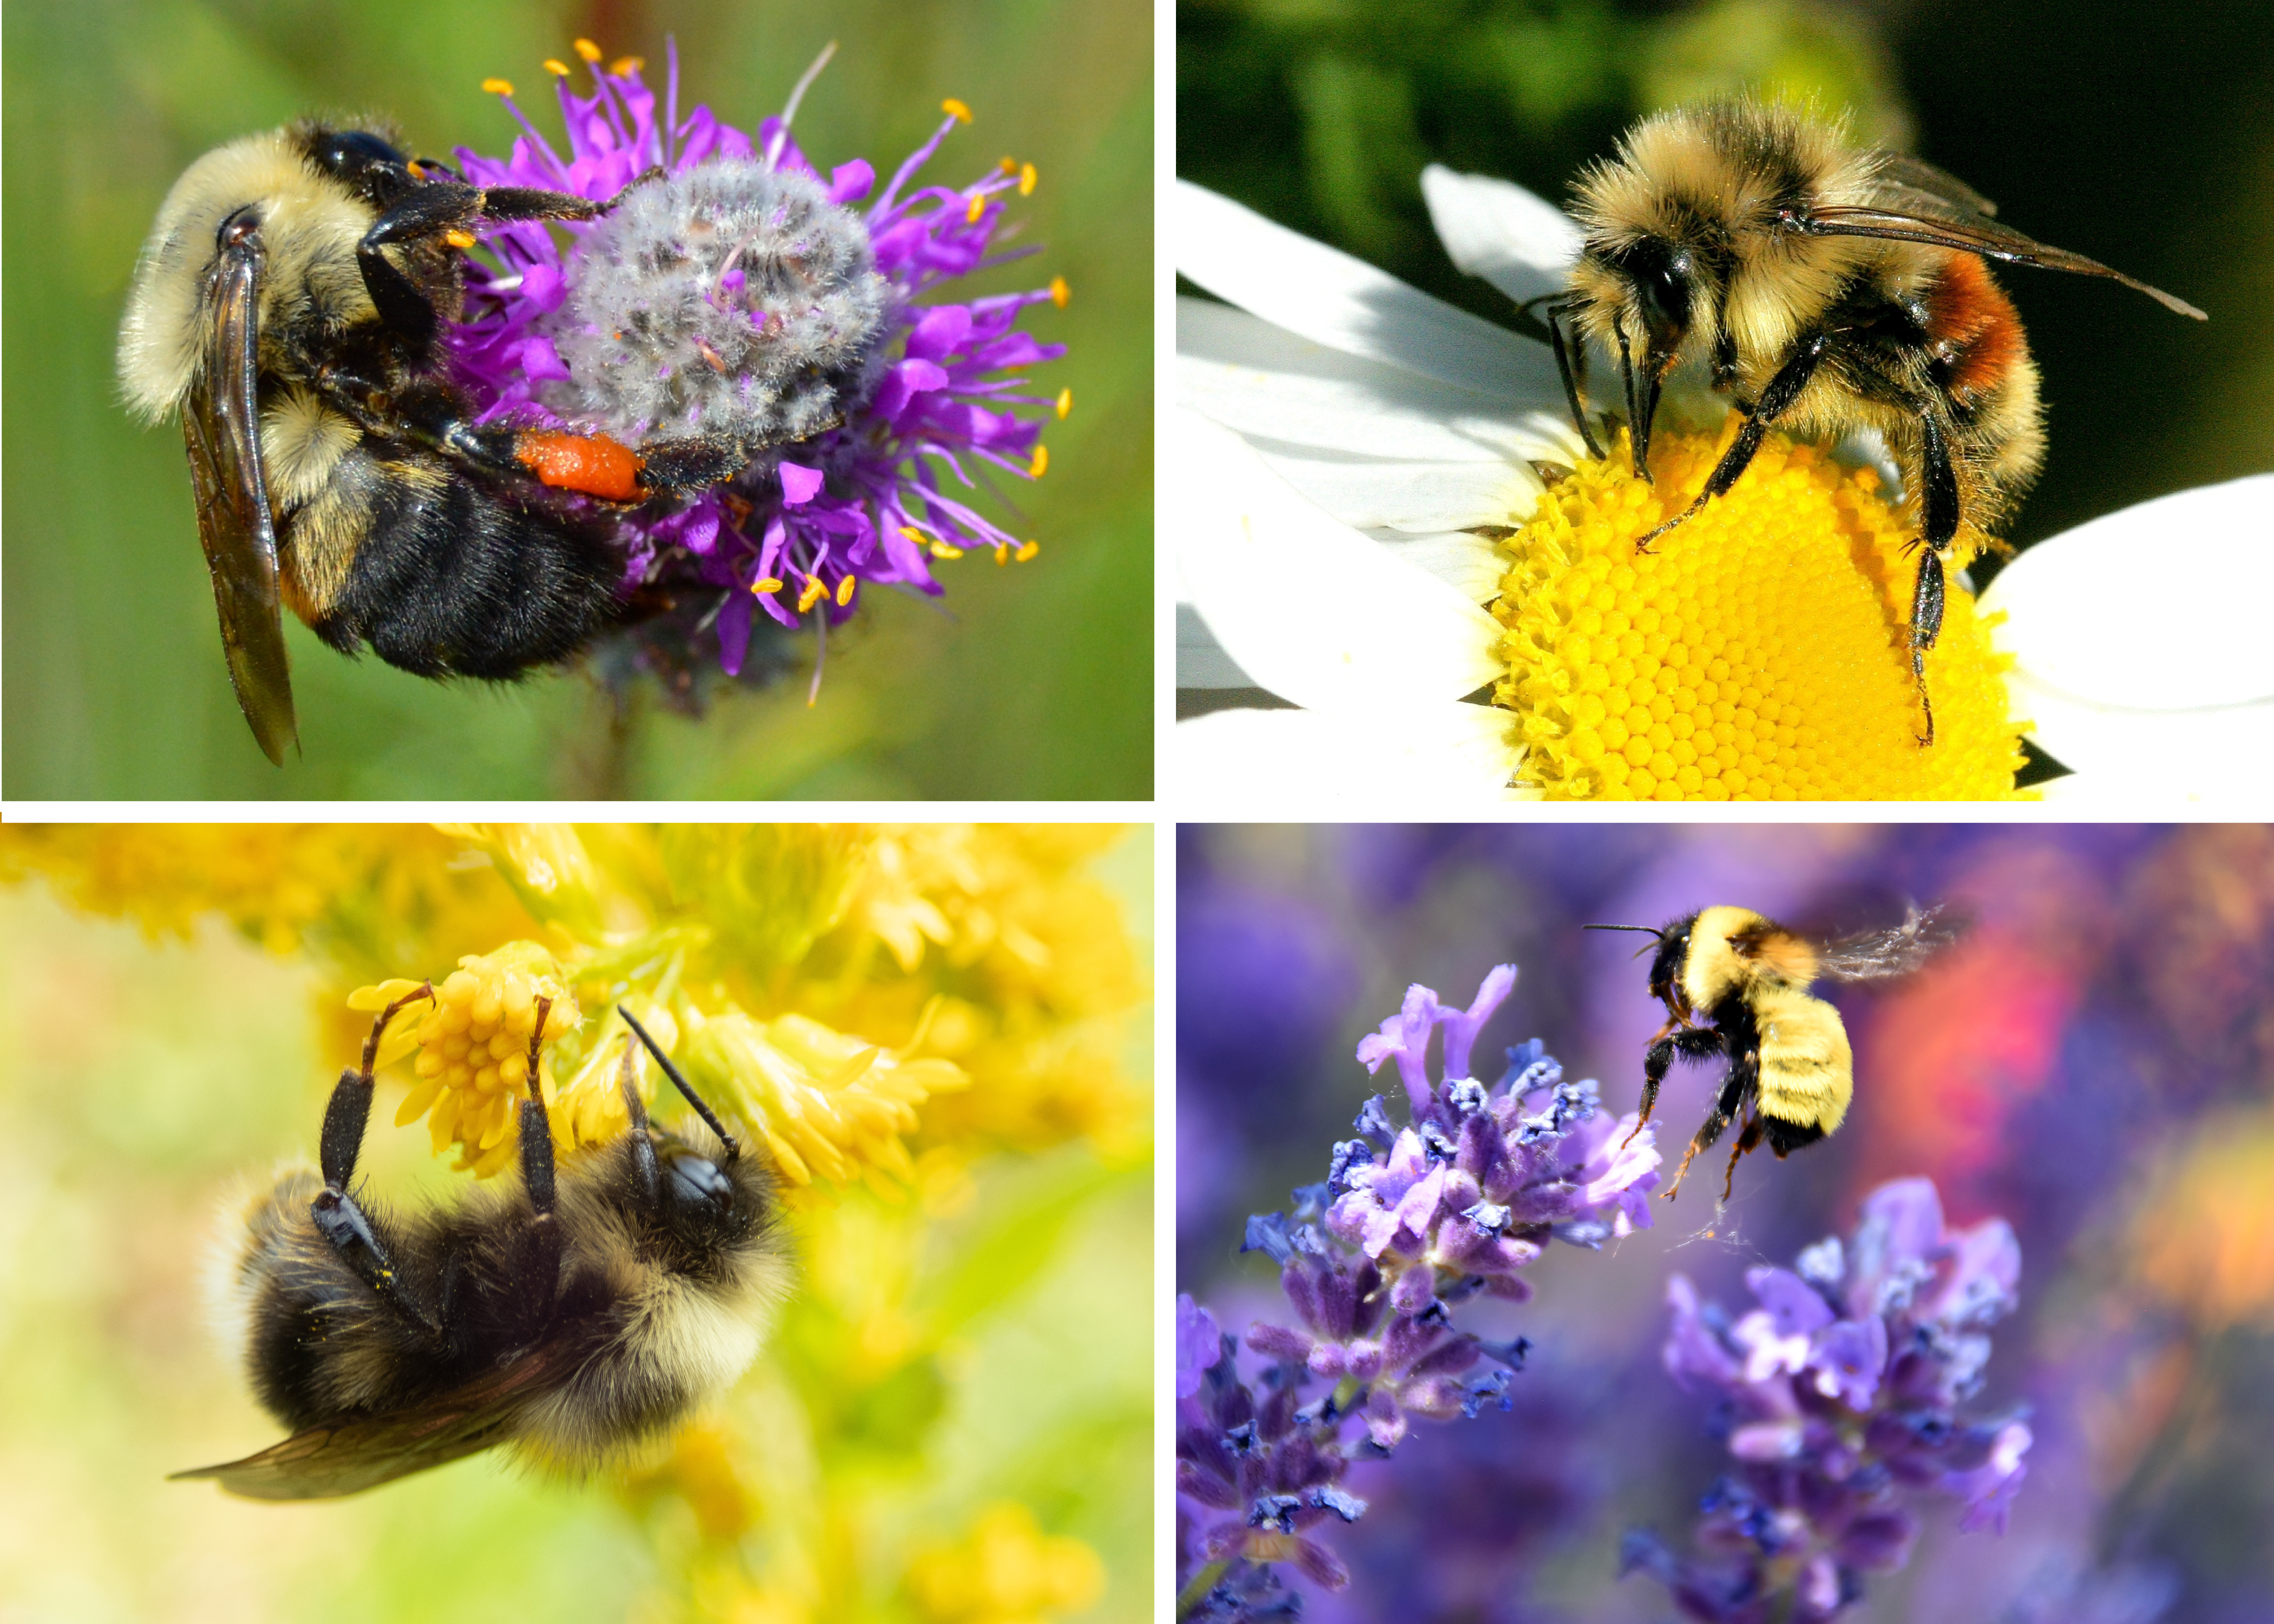 A colorful collection of images demonstrates the diversity of bumble bees.